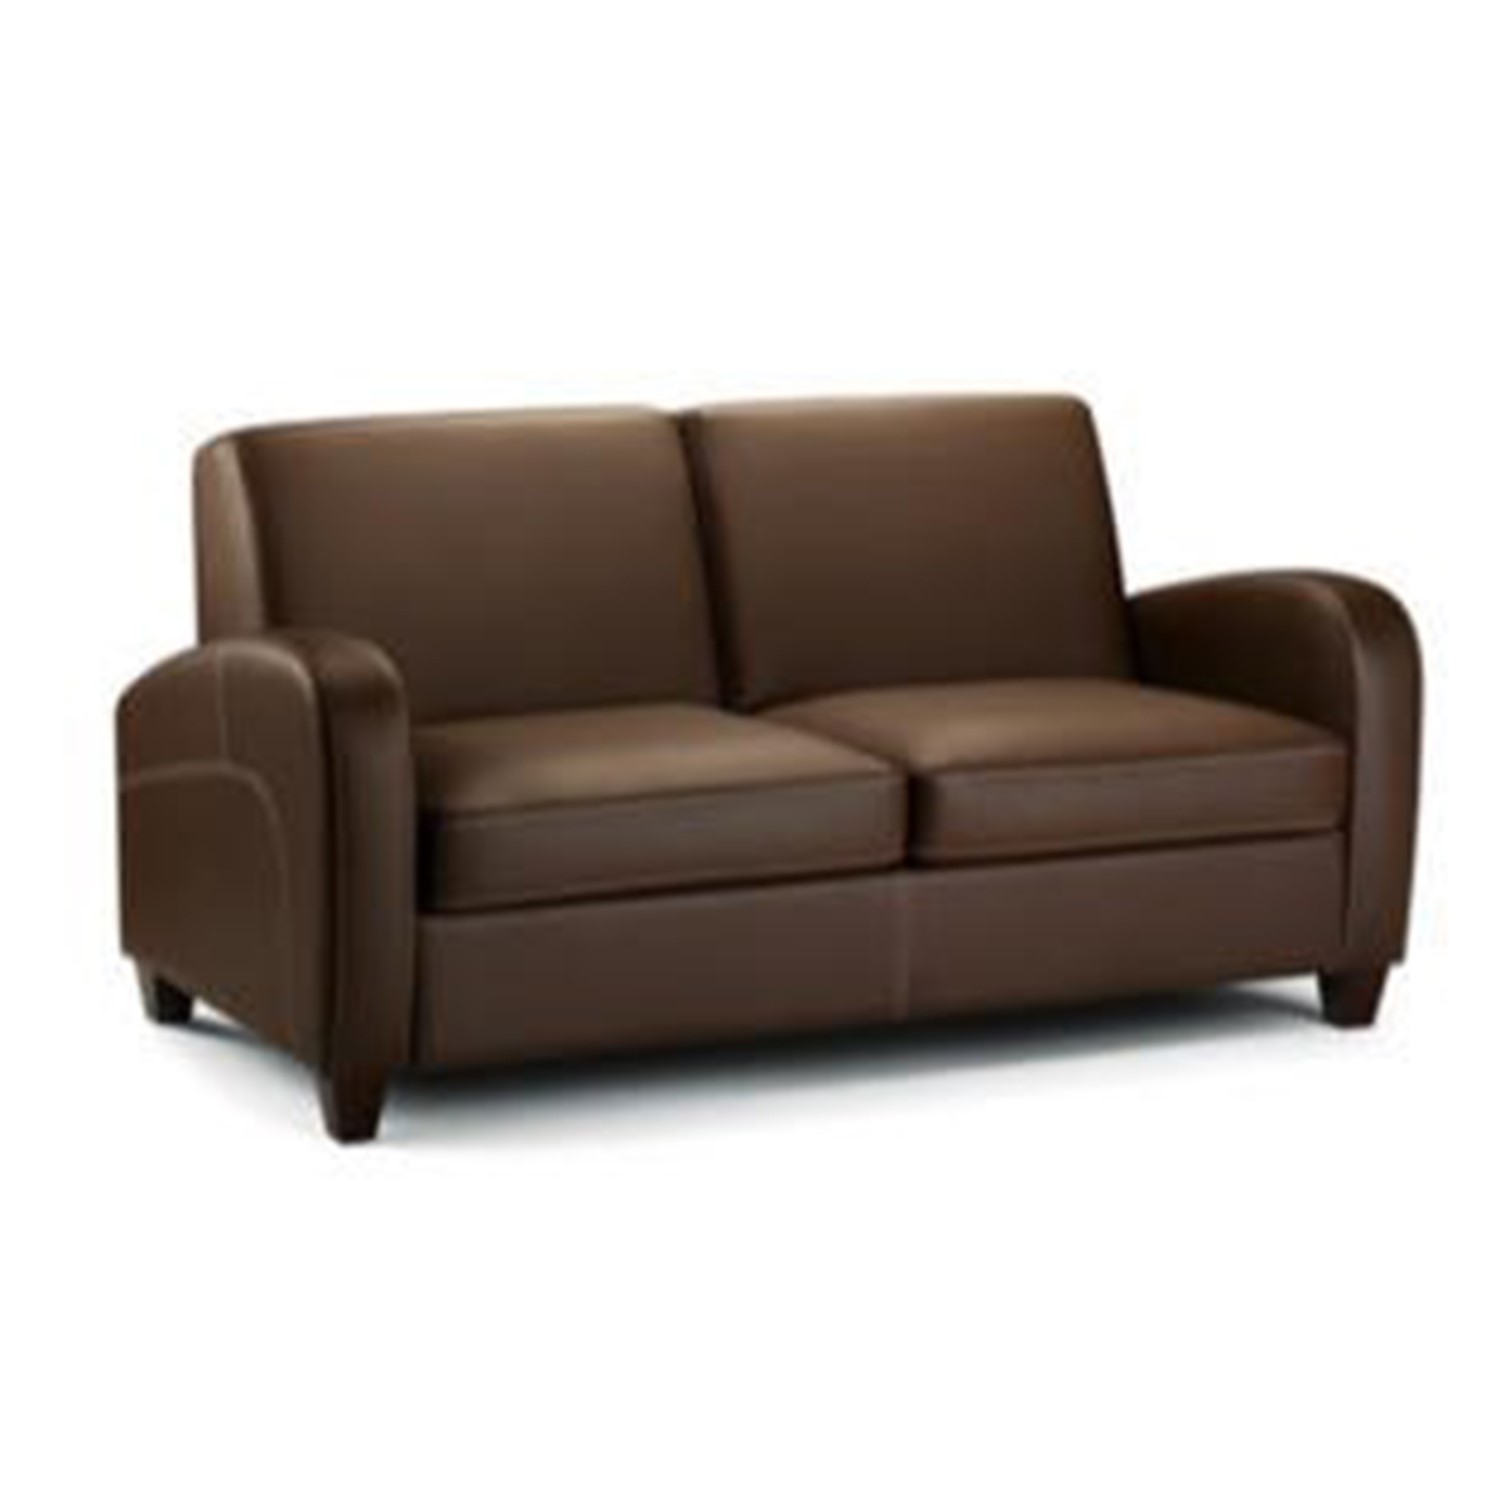 Julian Bowen Brown Vivo Sofa Bed In, Brown Faux Leather Sofa Bed